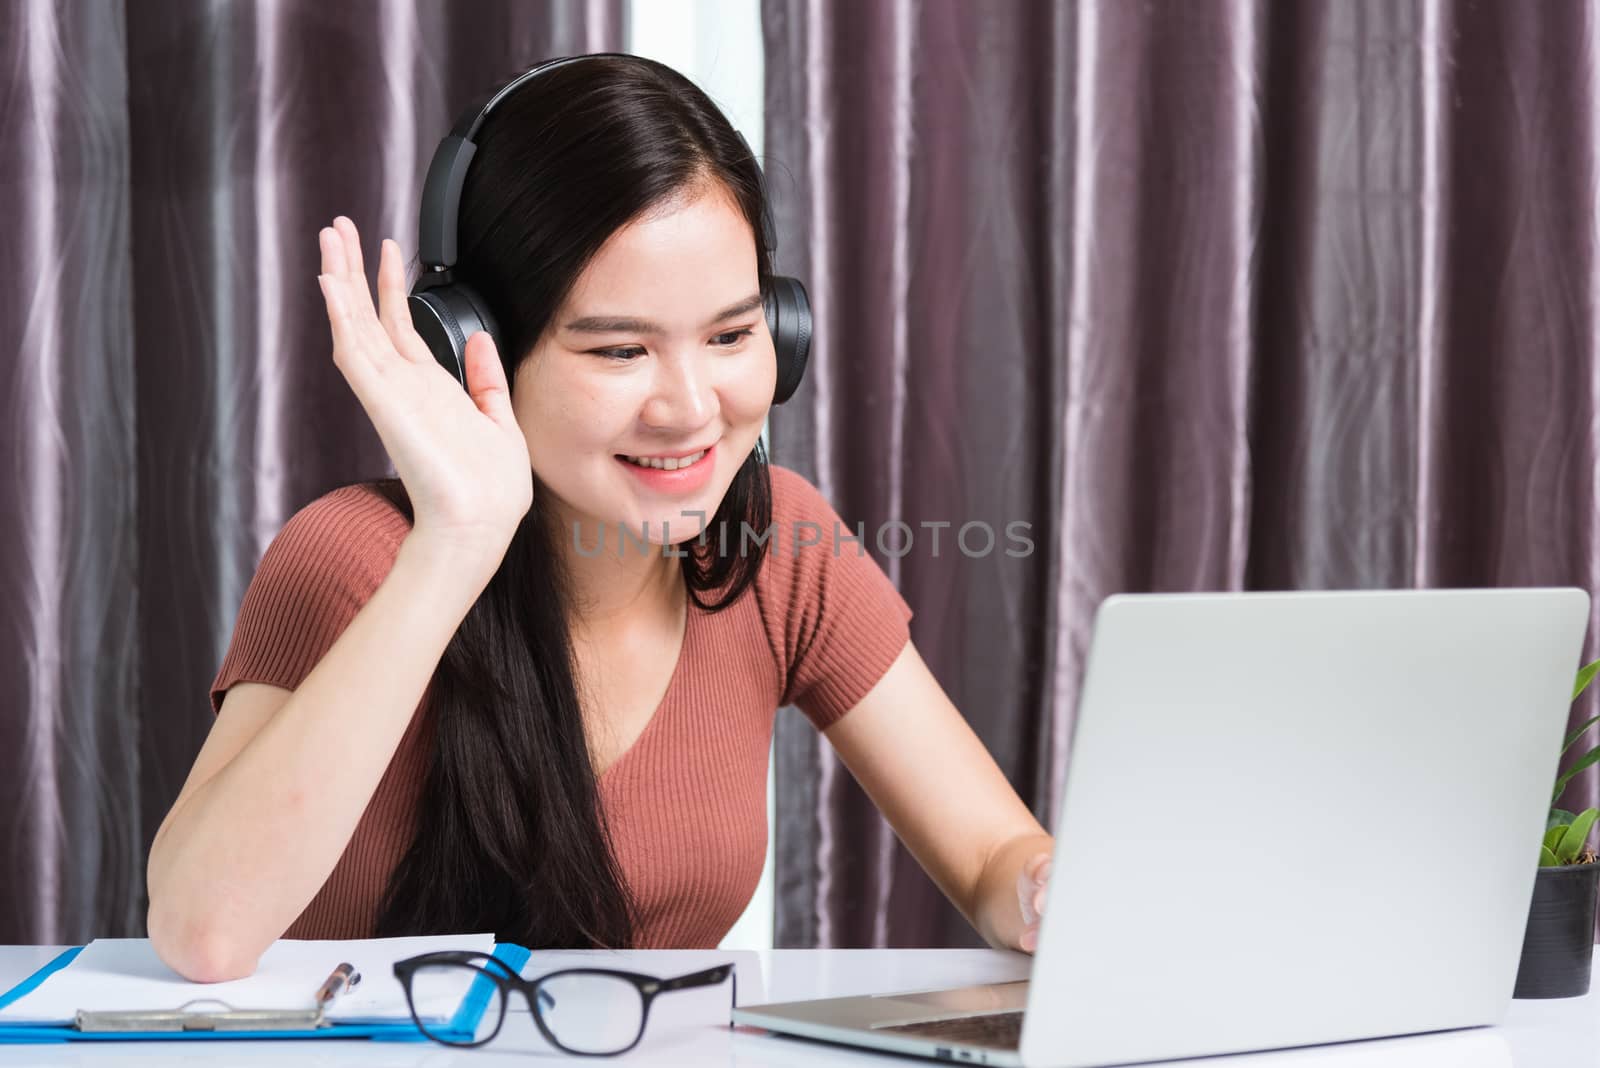 Business woman wearing headphones video call conference by Sorapop